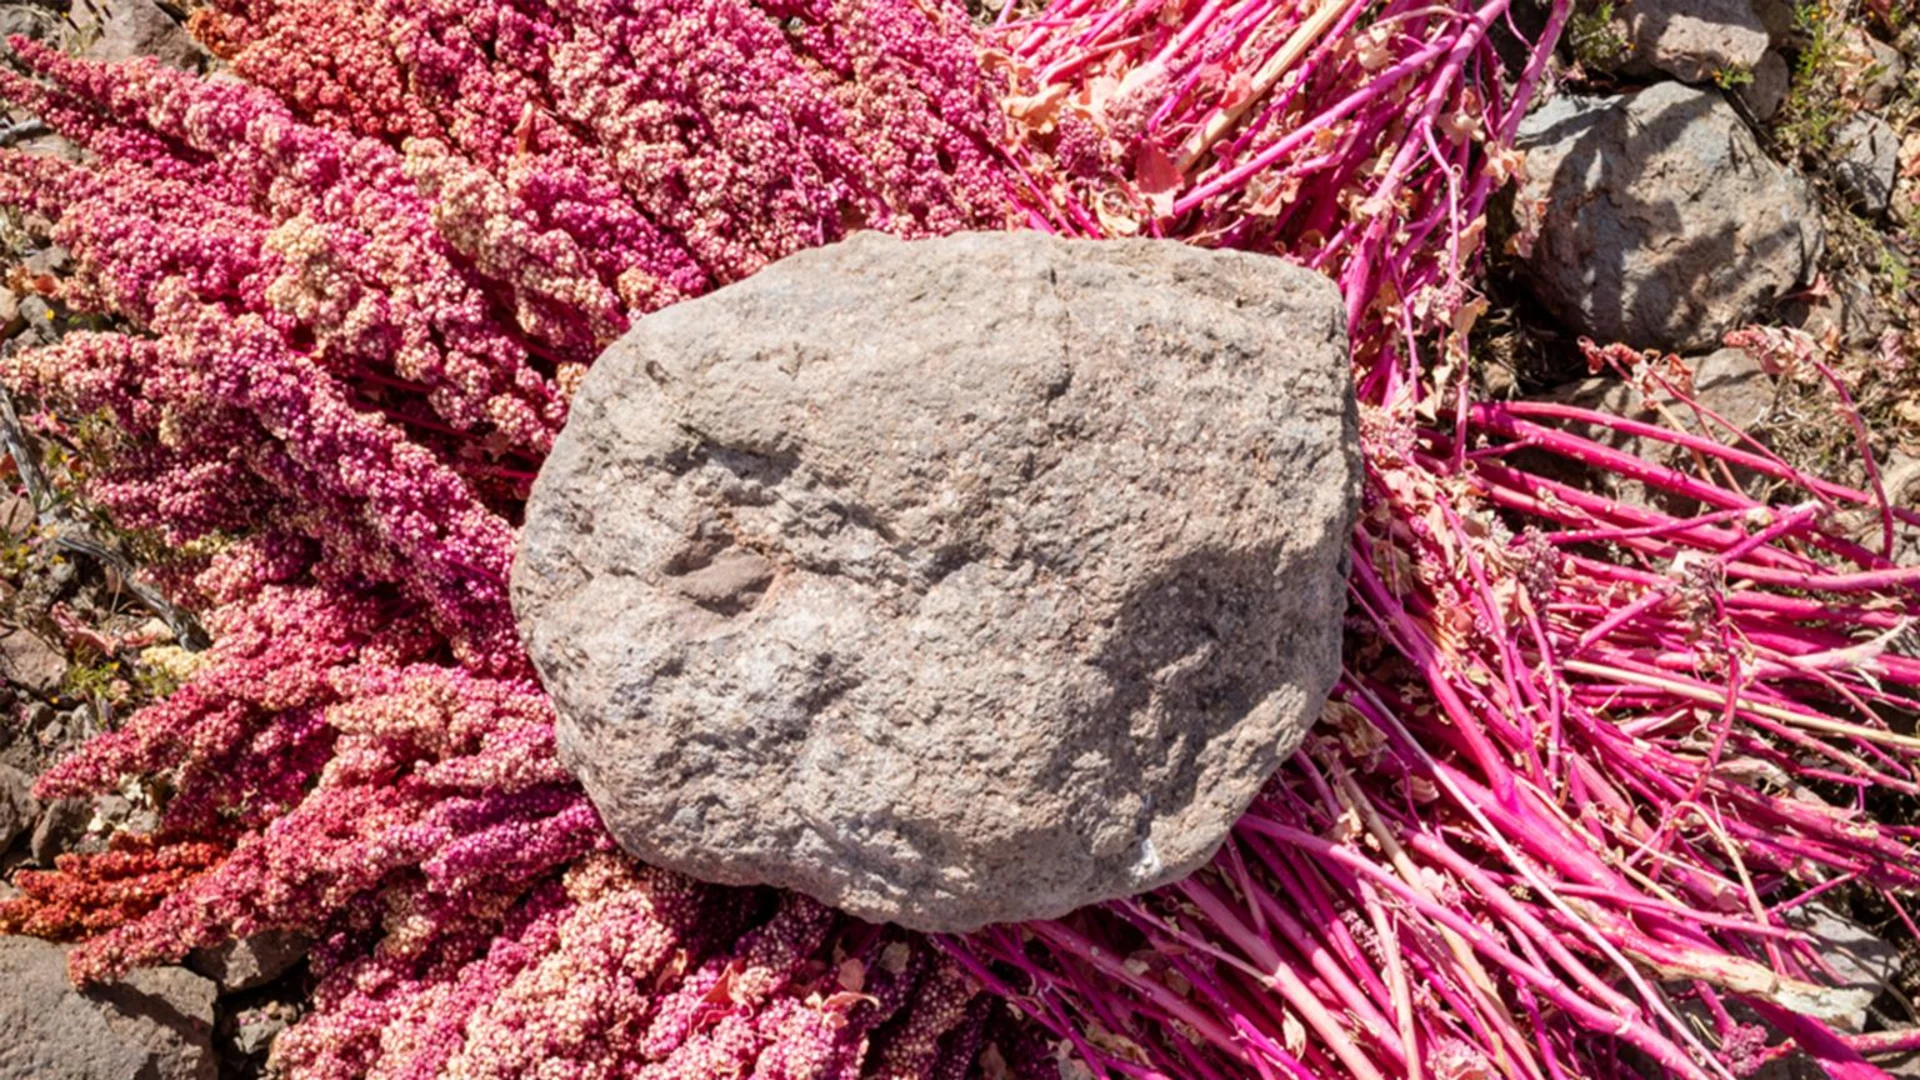 A stone weighs down pink, picked quinoa bushes.